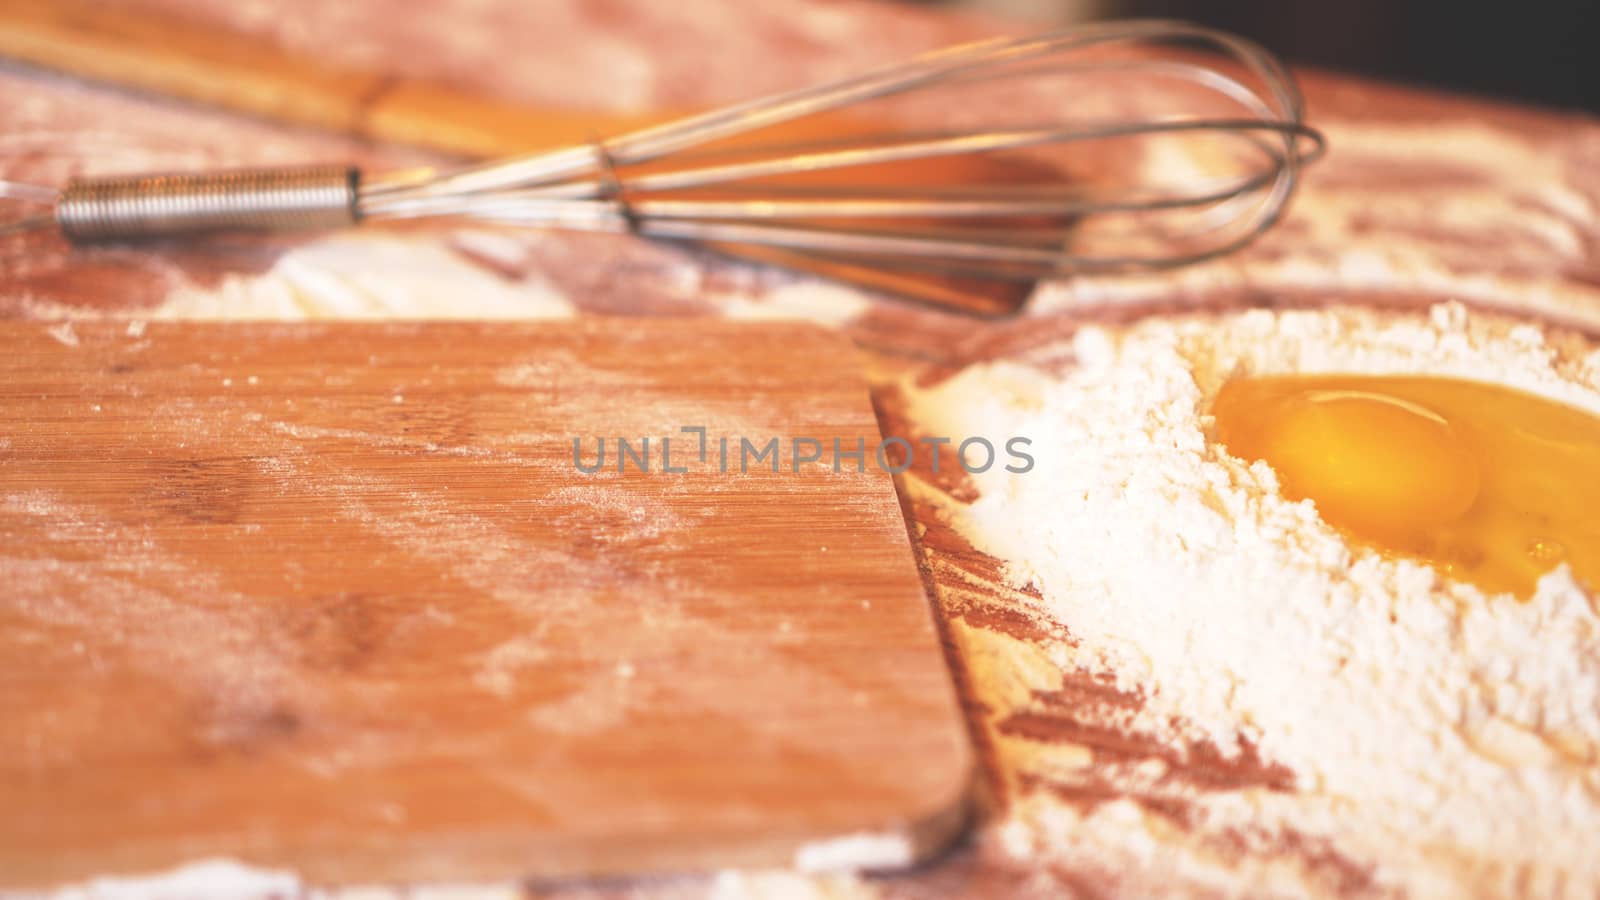 Ingredients for baking homemade bread. Eggs, flour. Wooden background, side view by natali_brill